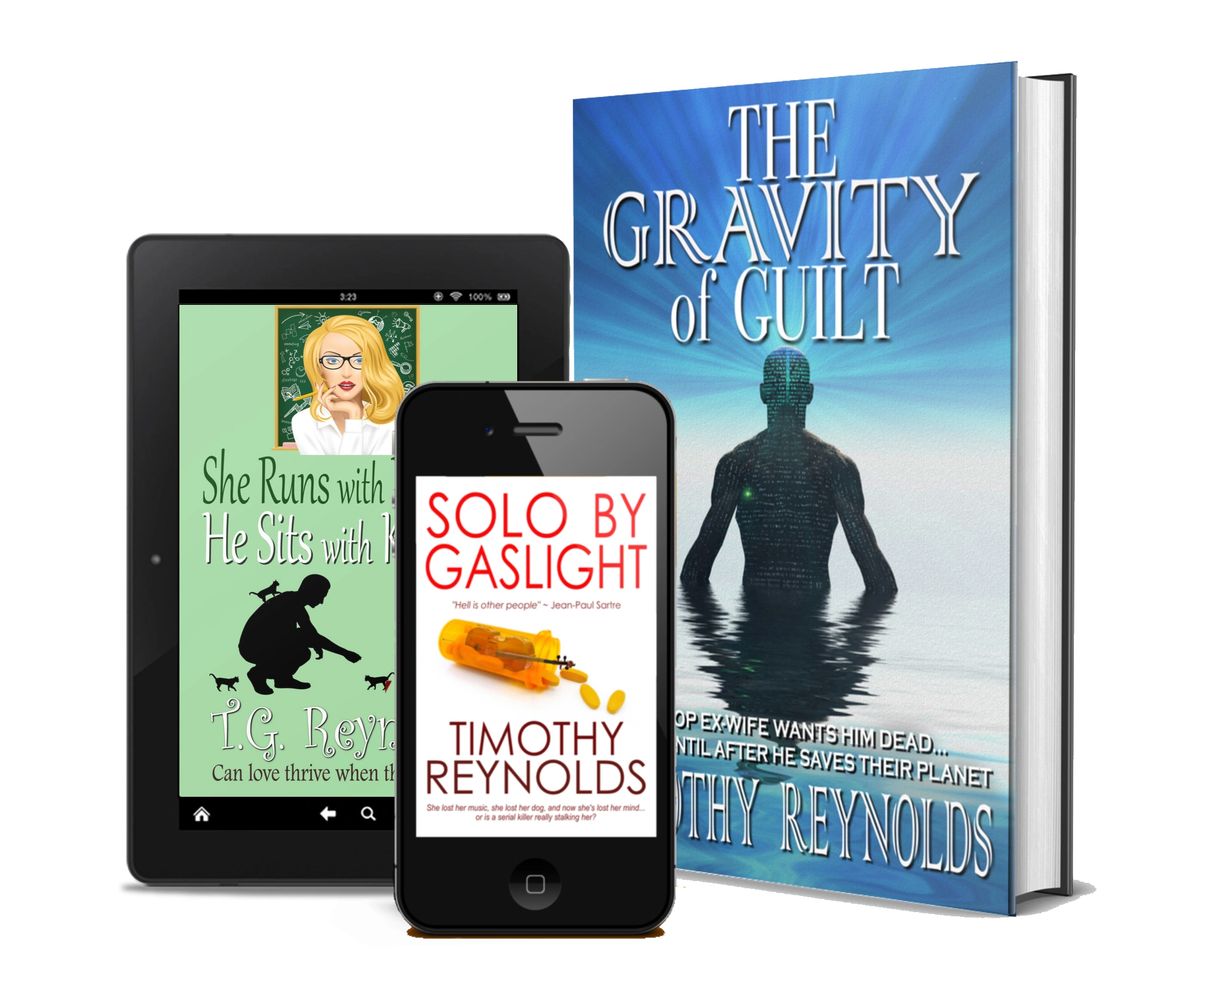 The covers of three books by Timothy Reynolds.